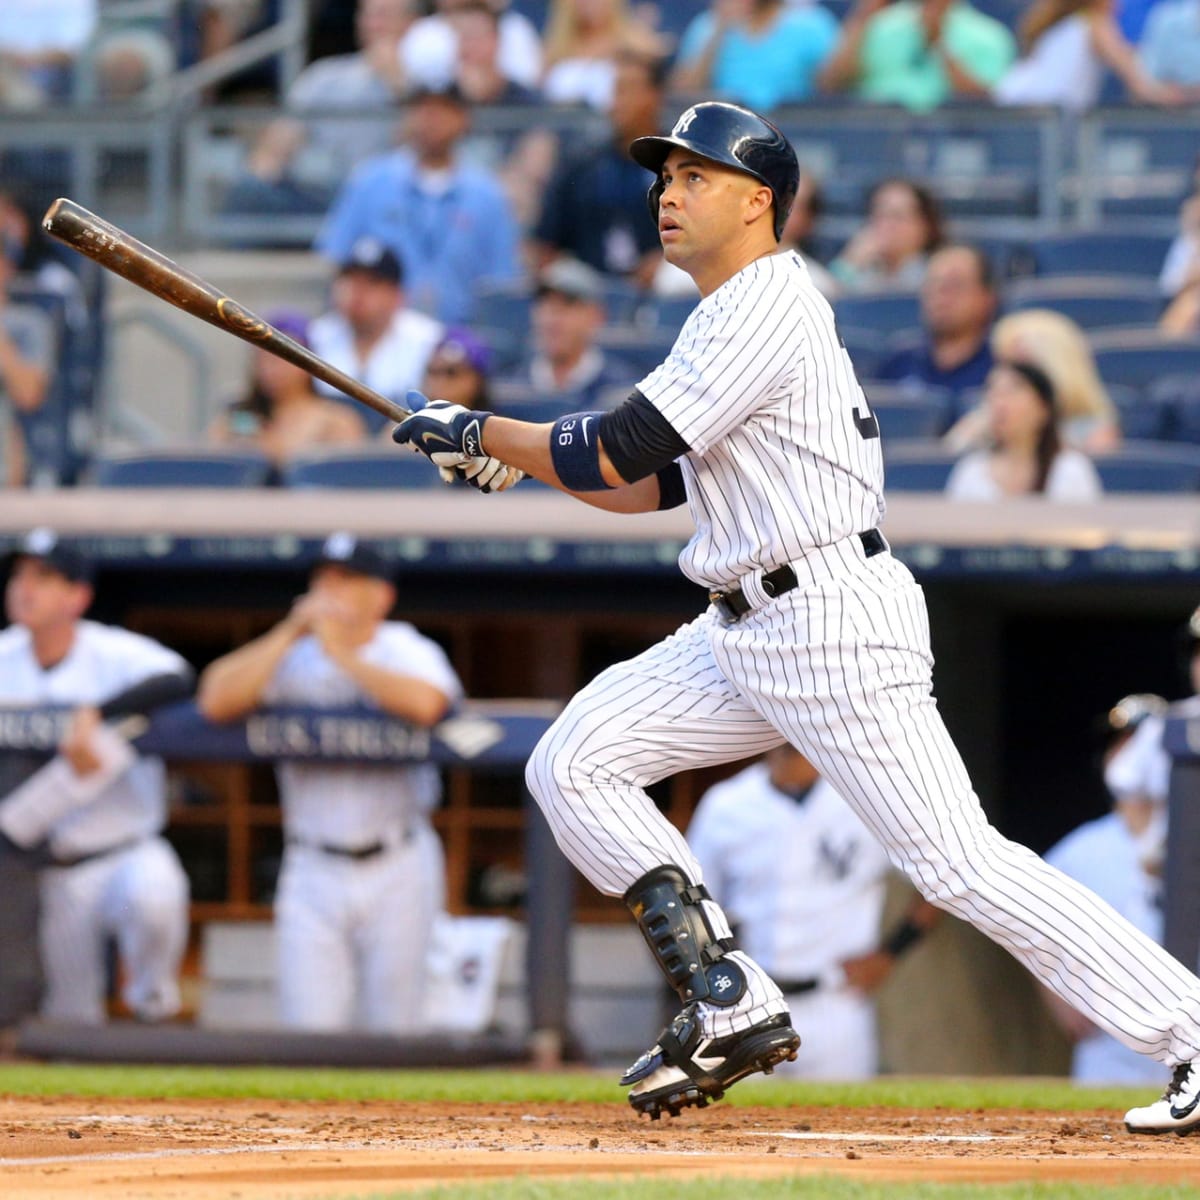 Carlos Beltran weirdly discussed pitch tipping during Yankees